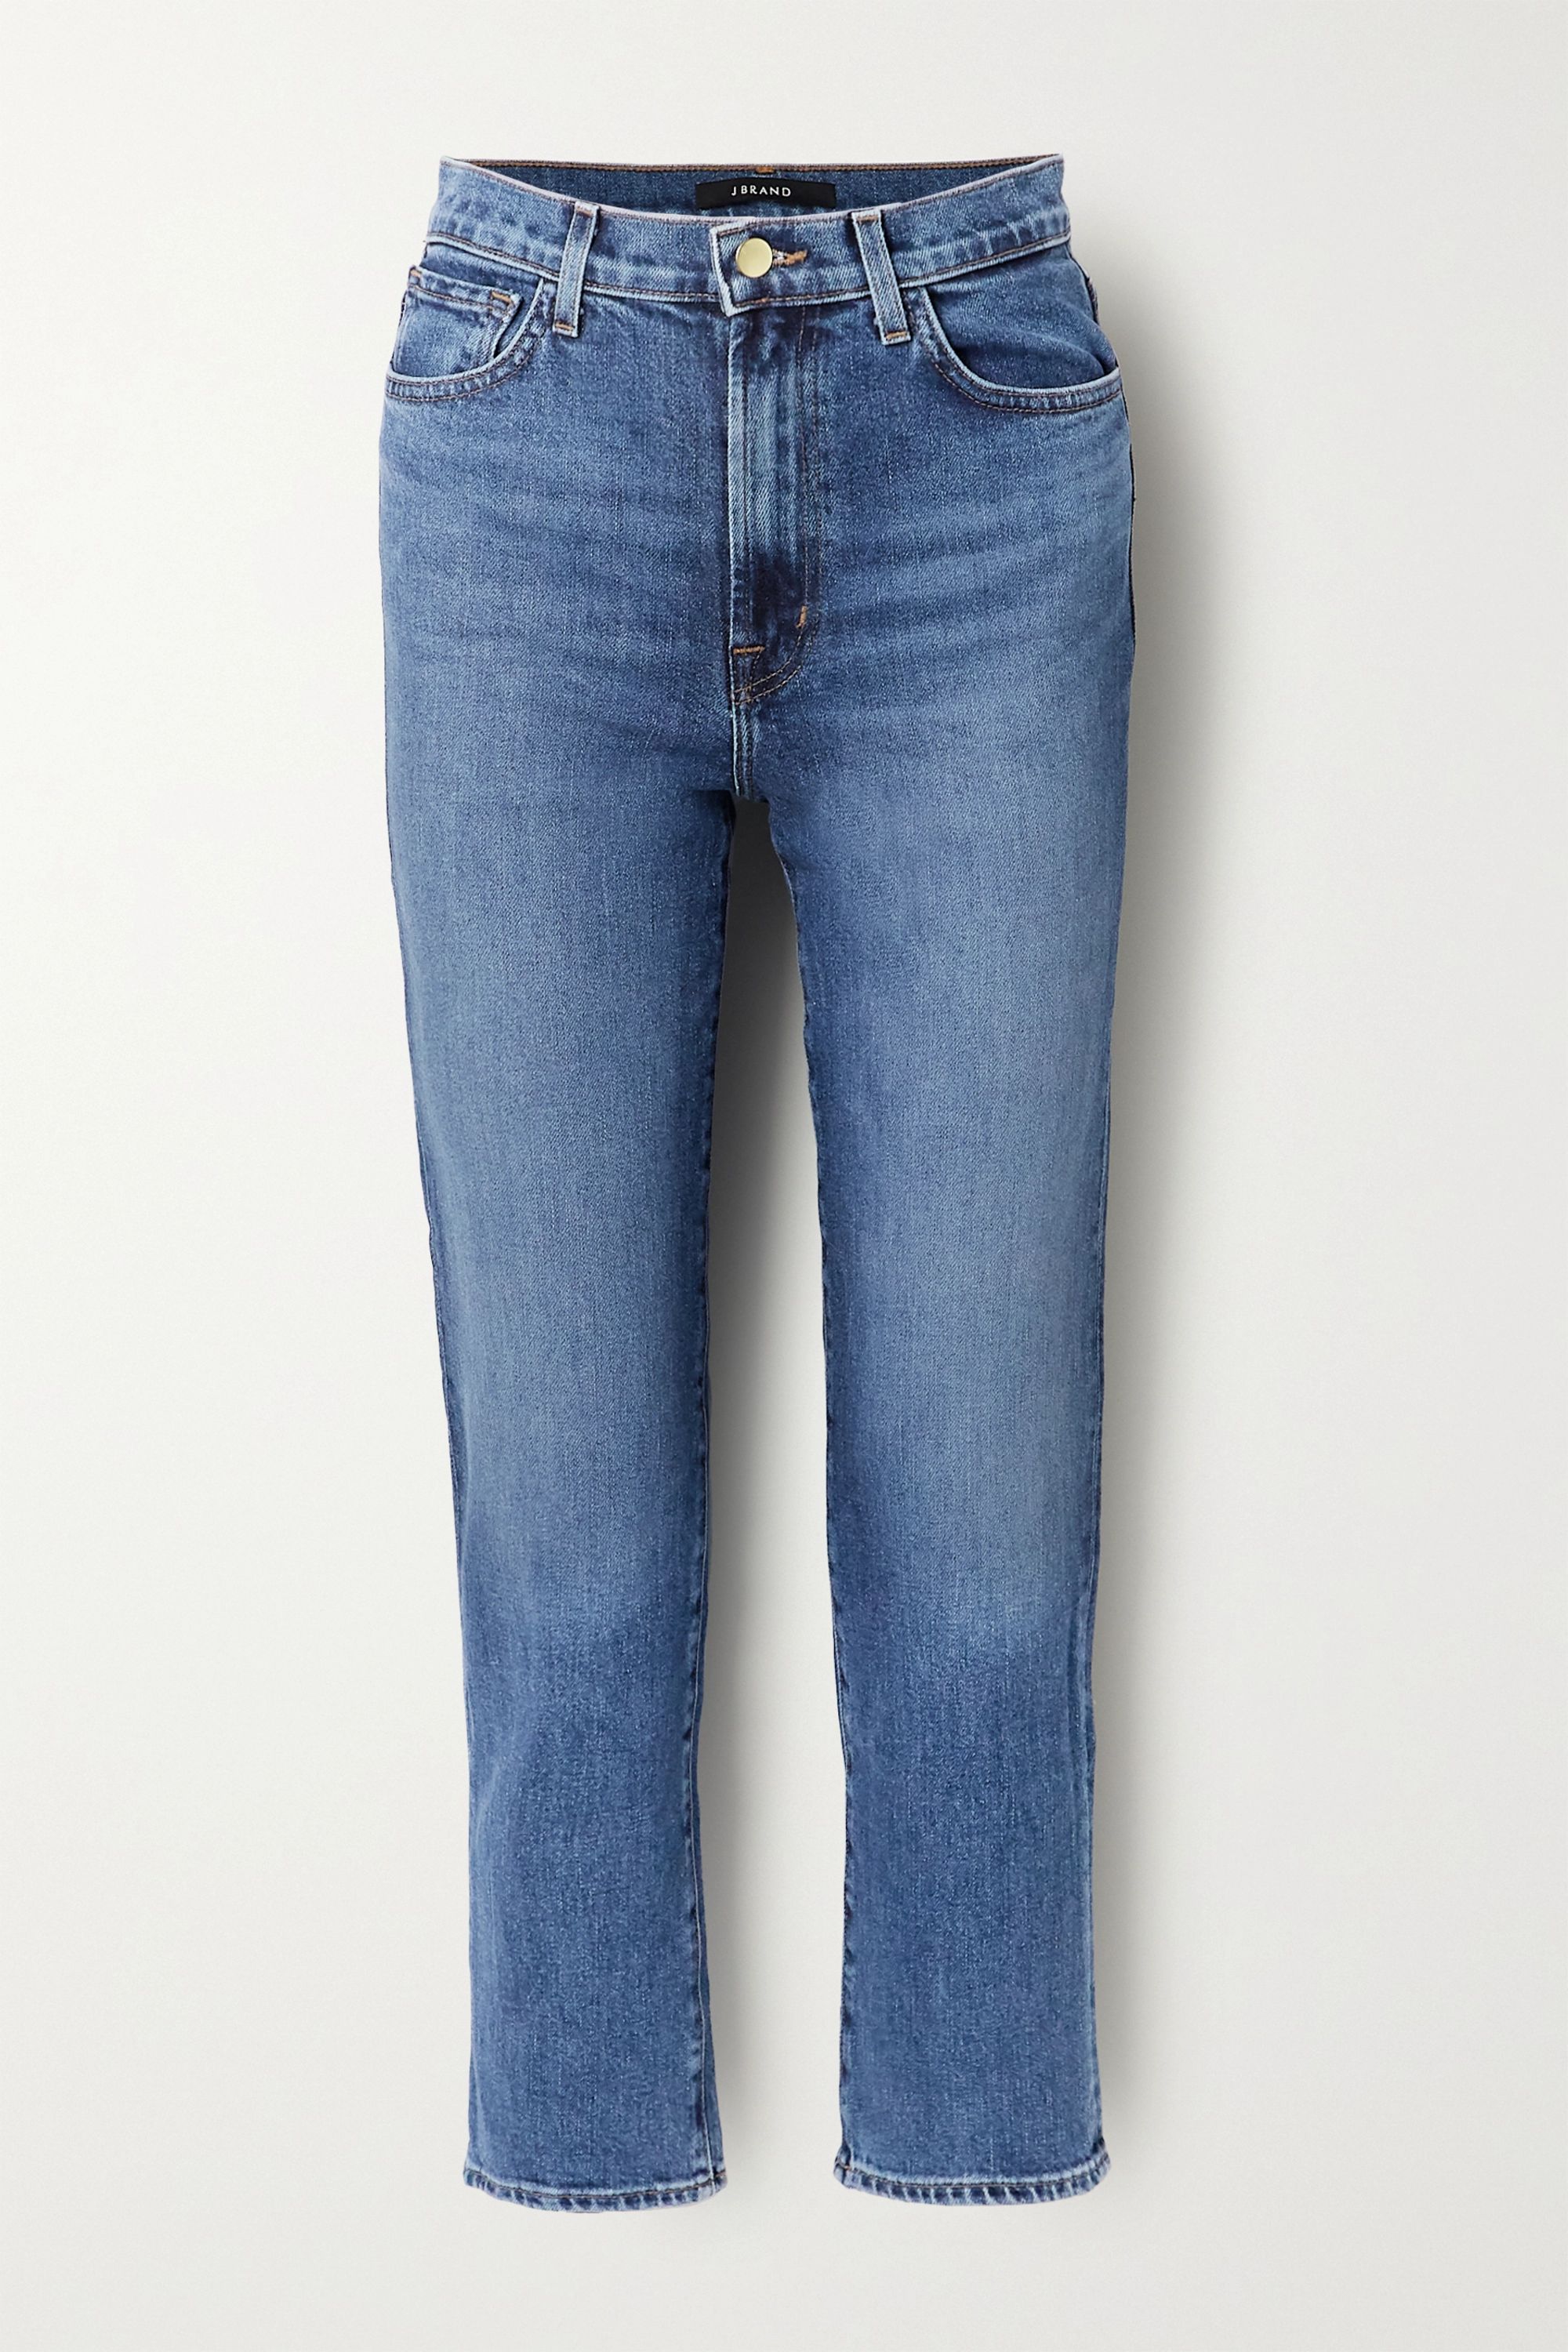 womens lightweight jeans for hot weather